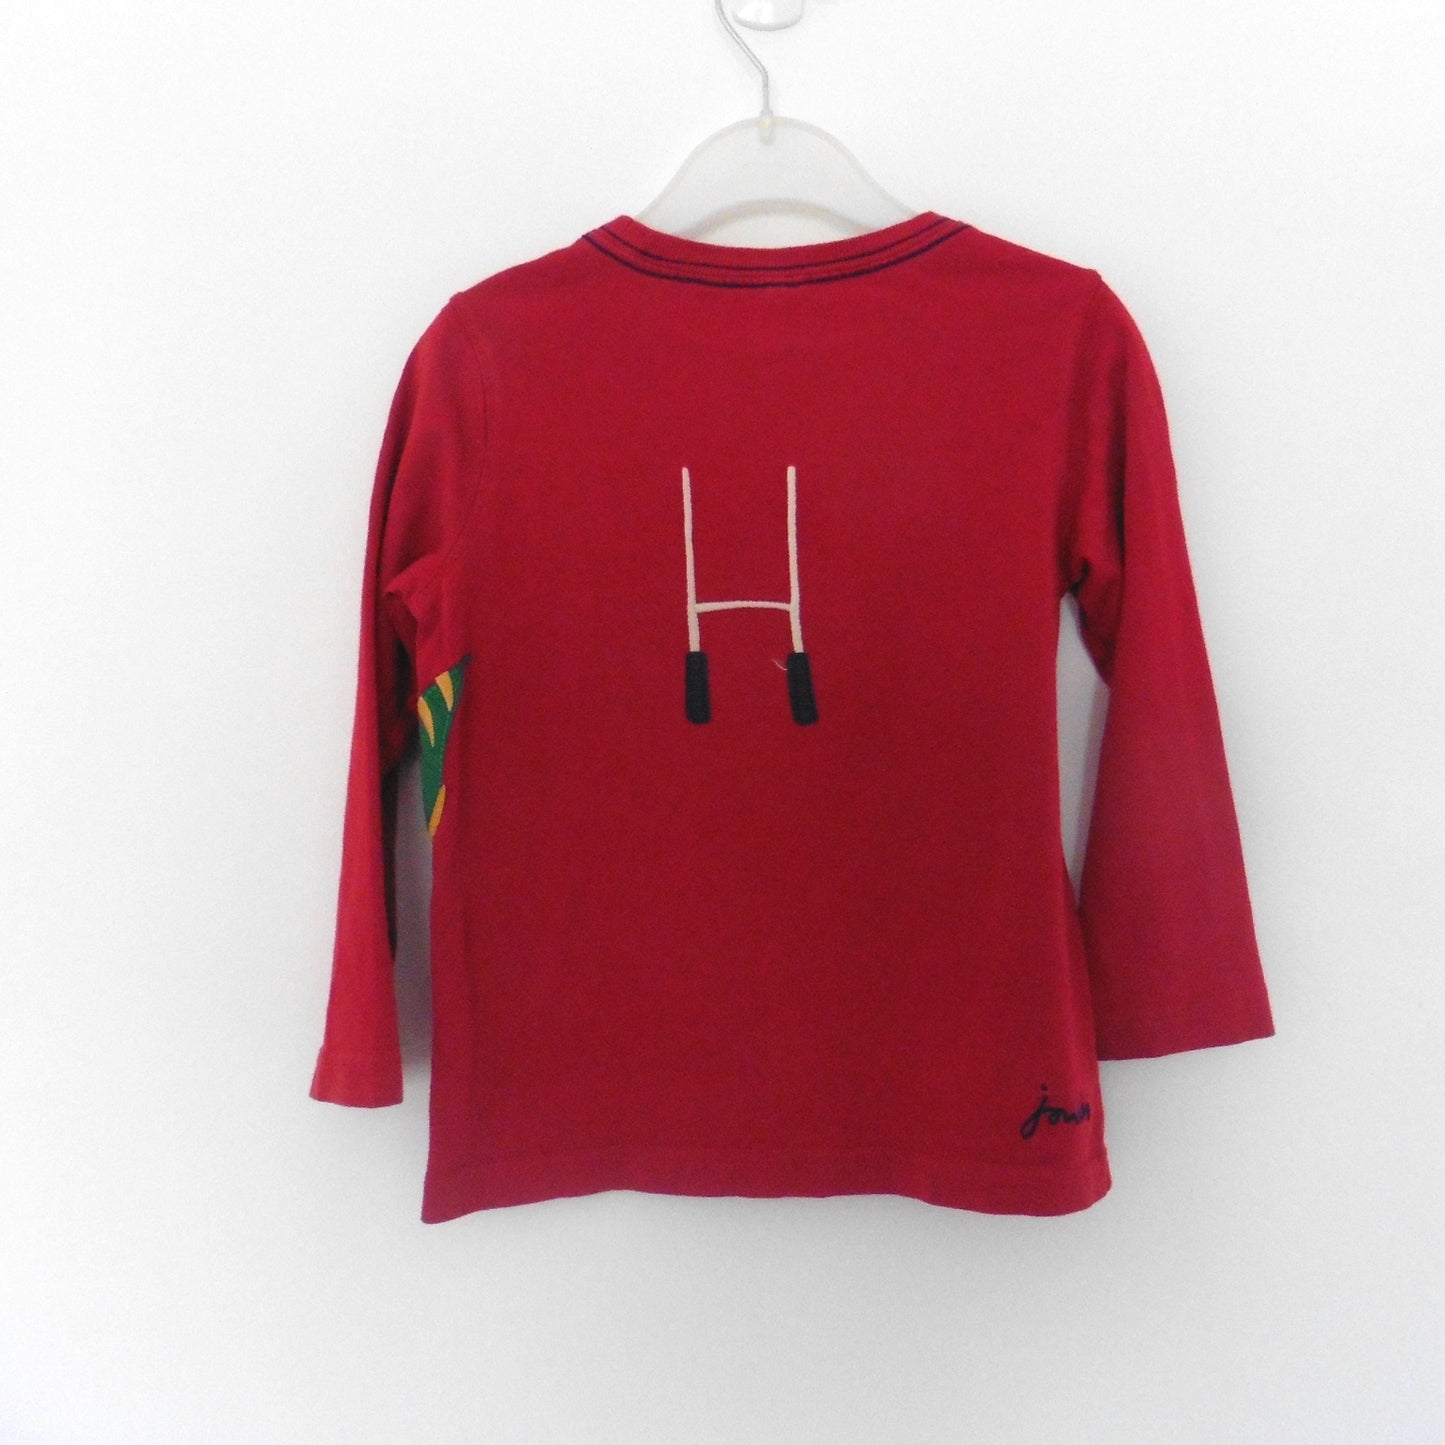 Joules Red Long Sleeve Top with Dinosaur 2y